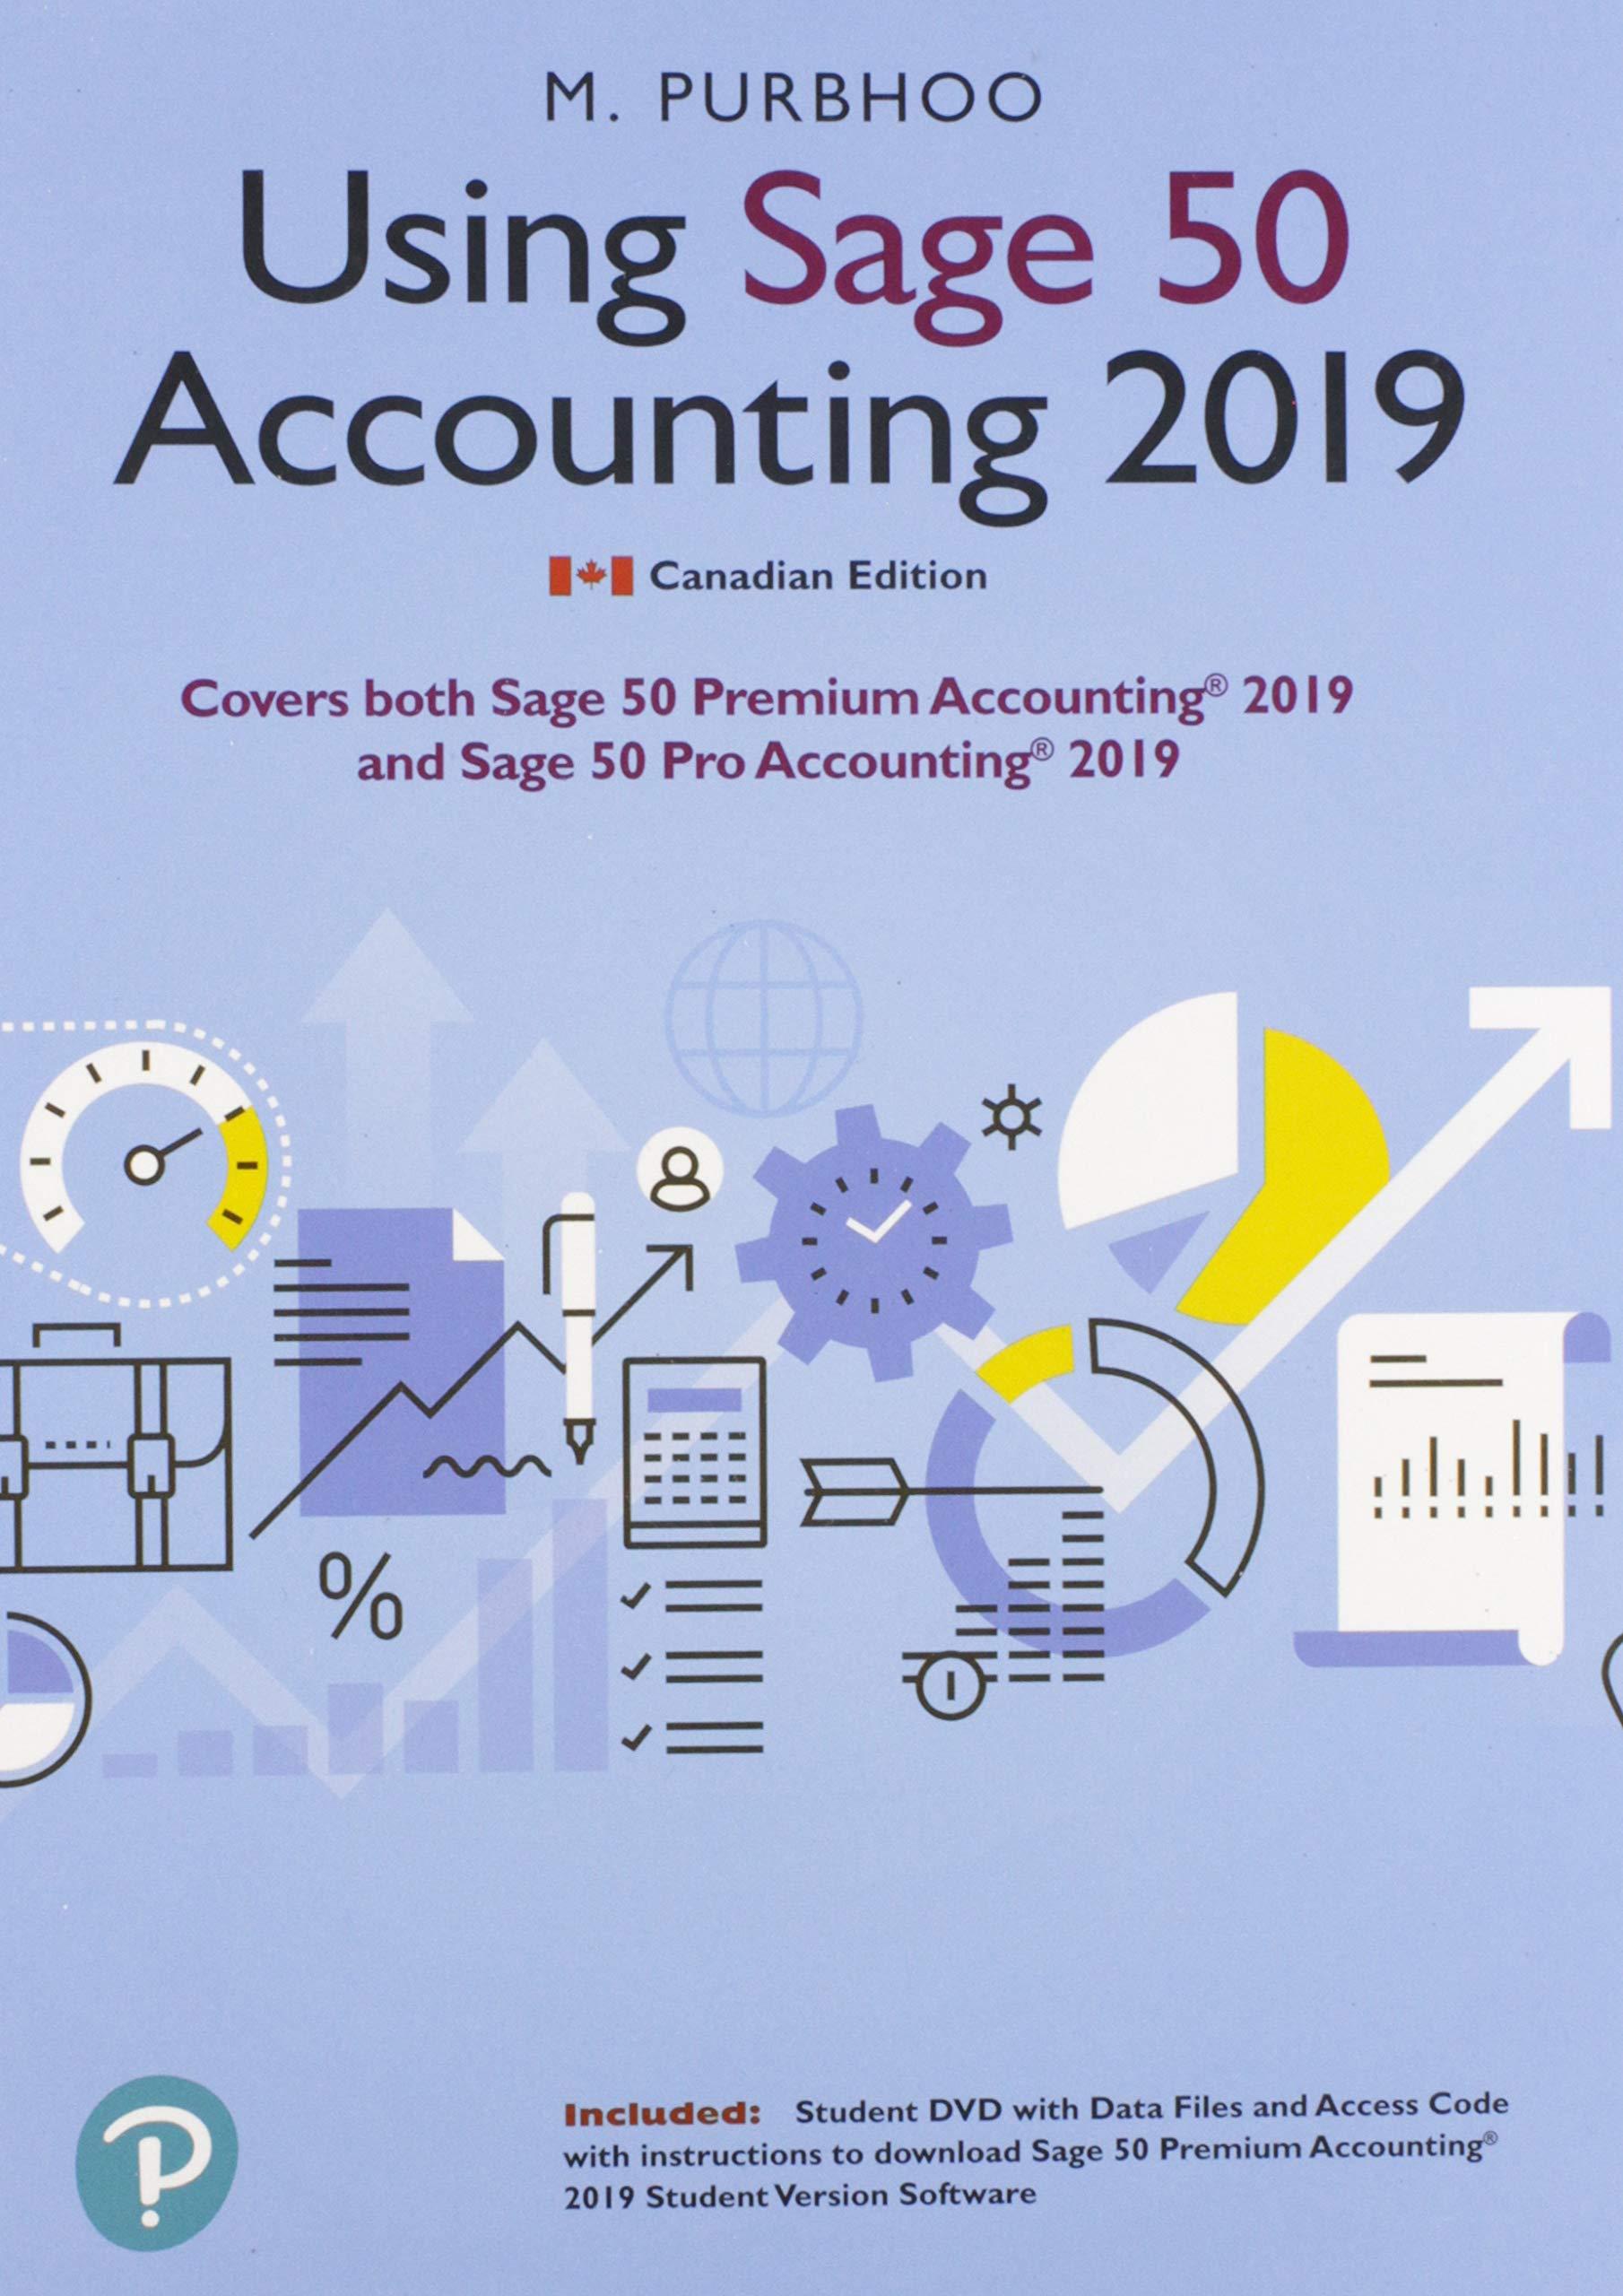 using sage 50 accounting 2019 1st canadian edition mary purbhoo 0135669170, 978-0135669174